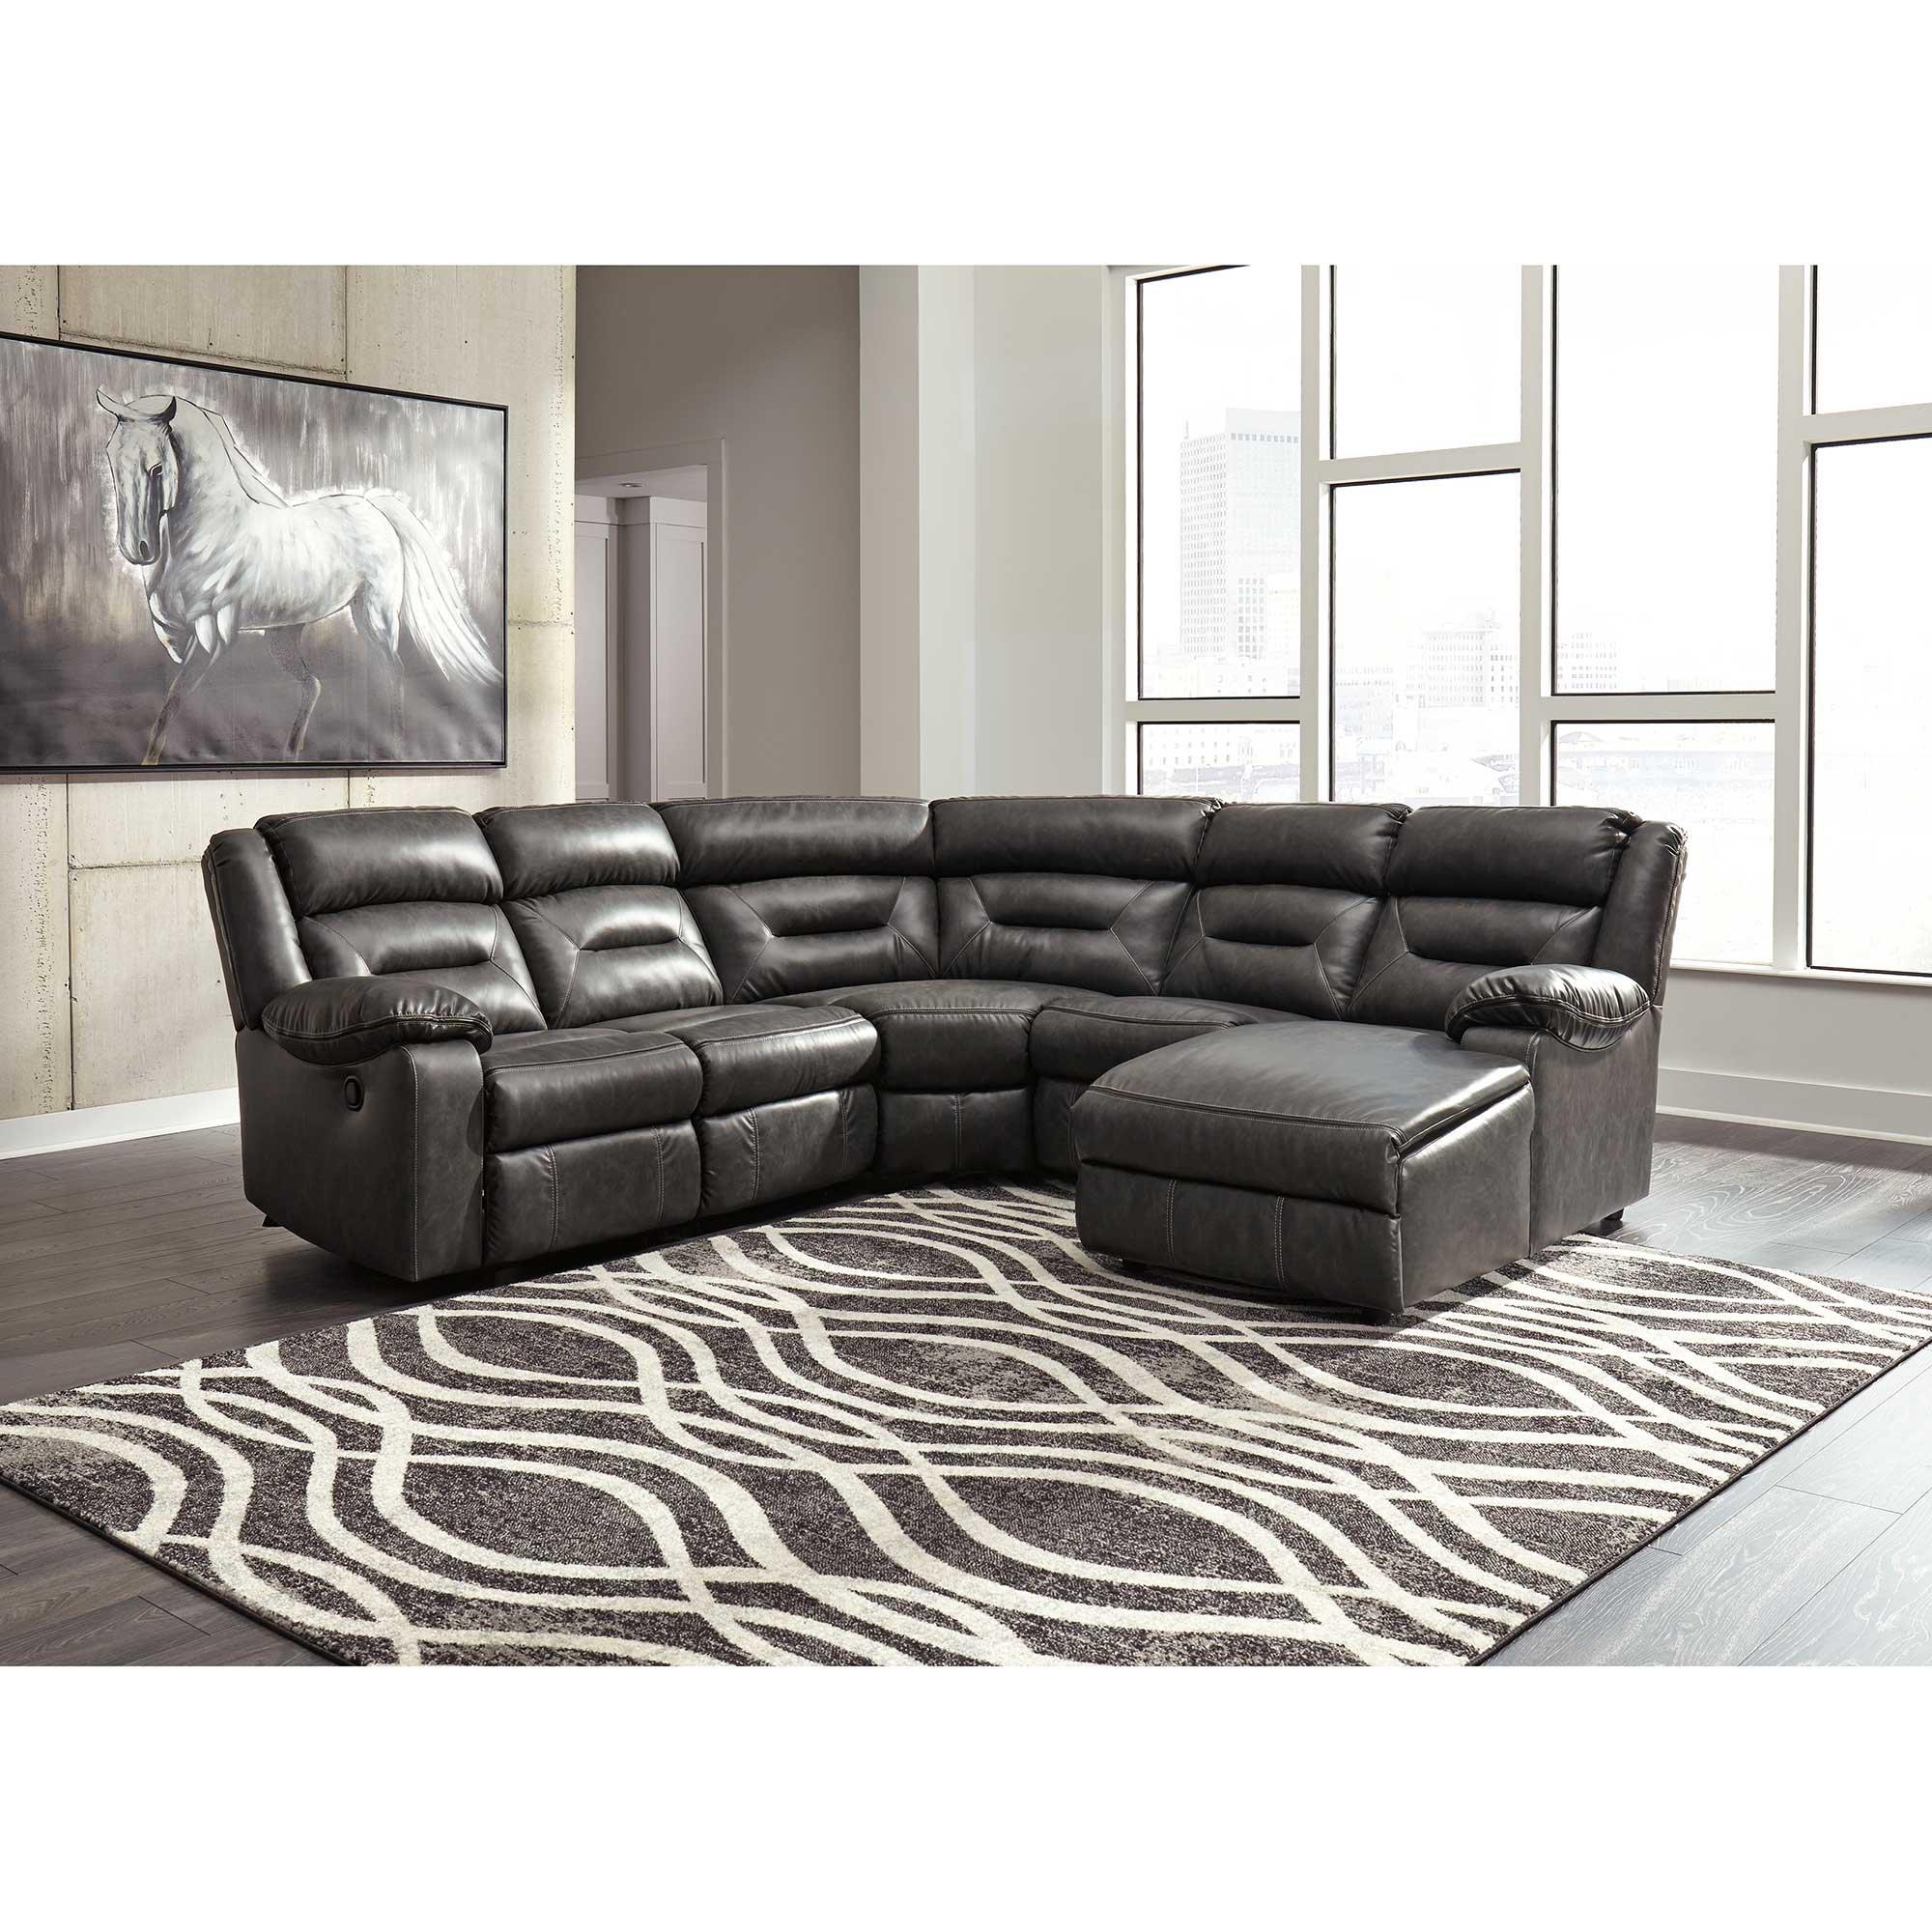 Ashley Furniture 5 Piece Living Room Set / Shop online or find a nearby